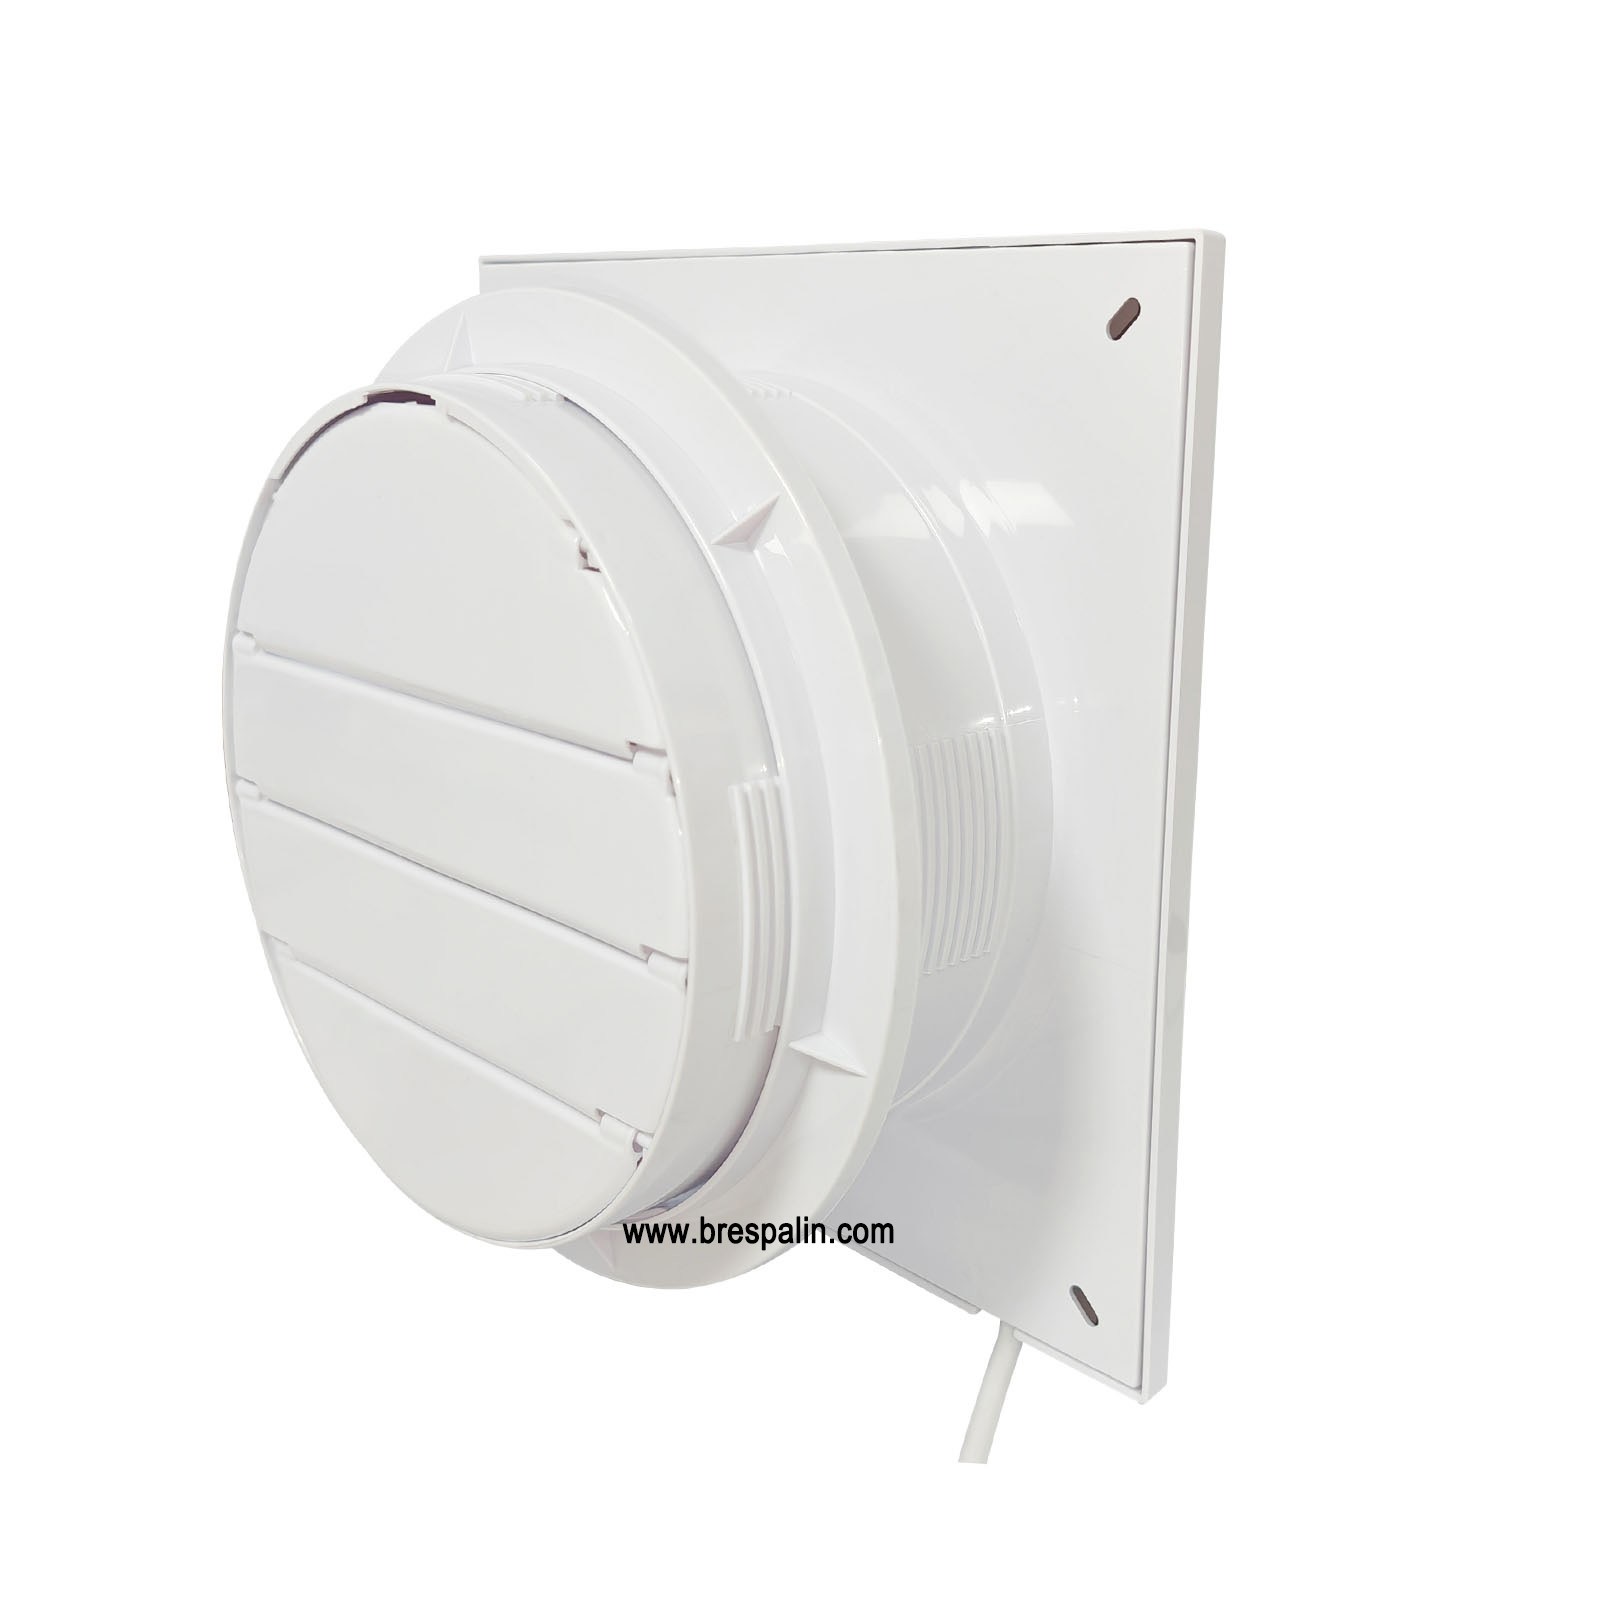 Air extractor Exhaust Fan with Shutter for Bathroom and Smoke room